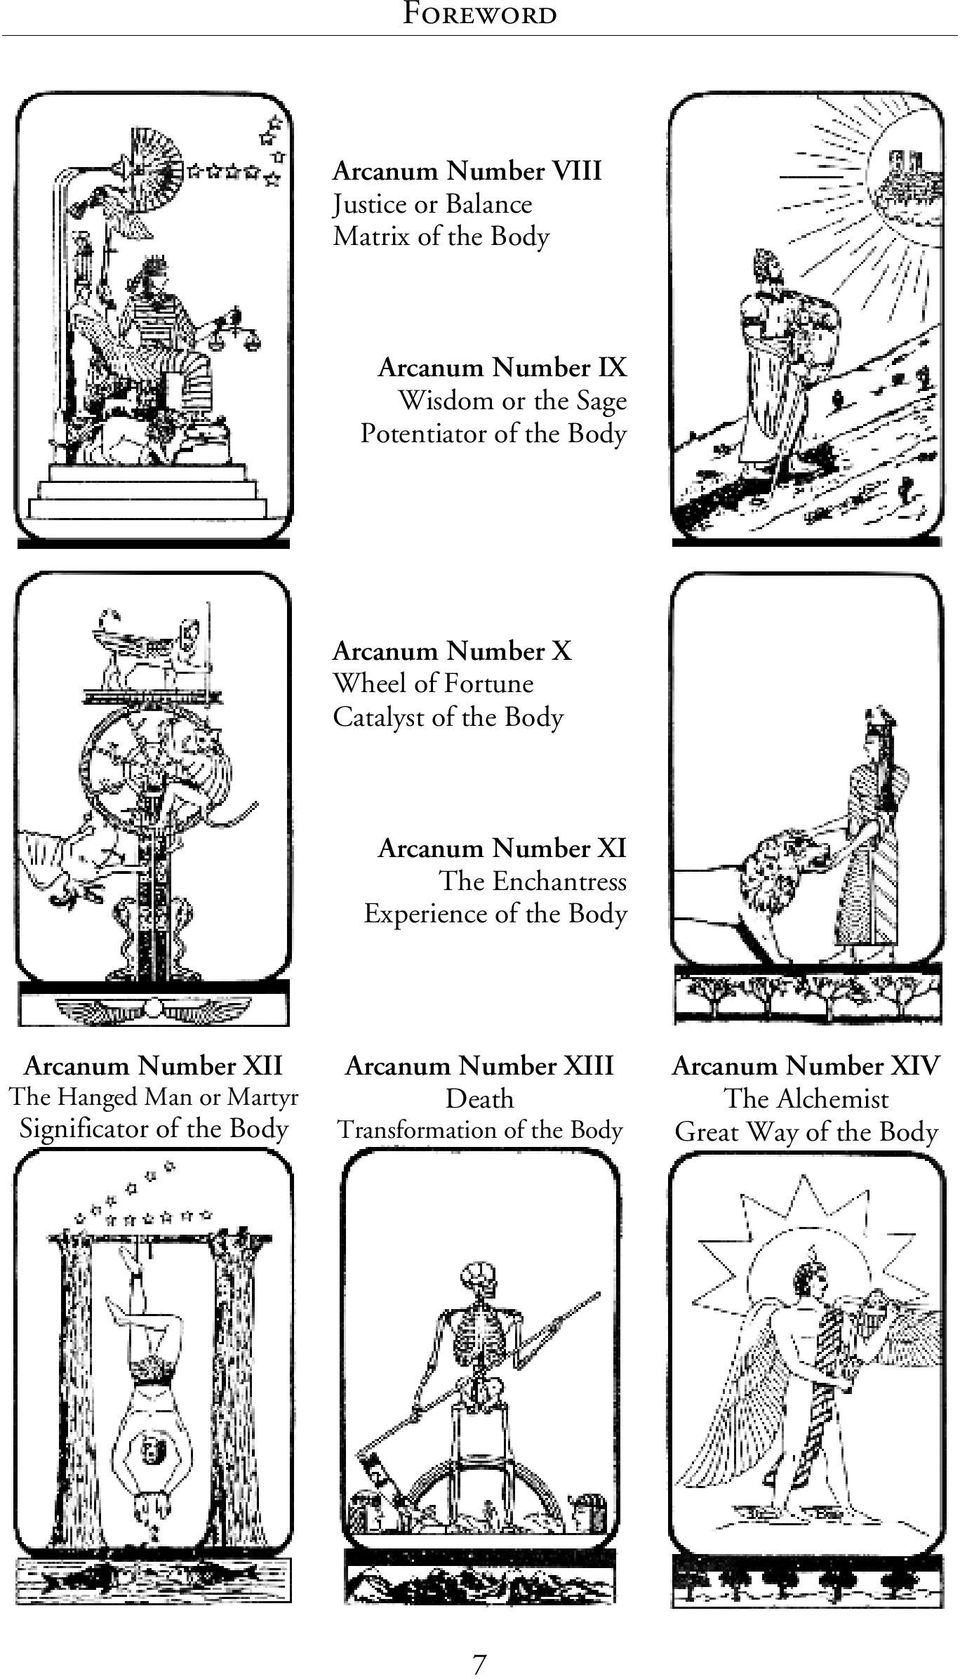 Enchantress Experience of the Body Arcanum Number XII The Hanged Man or Martyr Significator of the Body